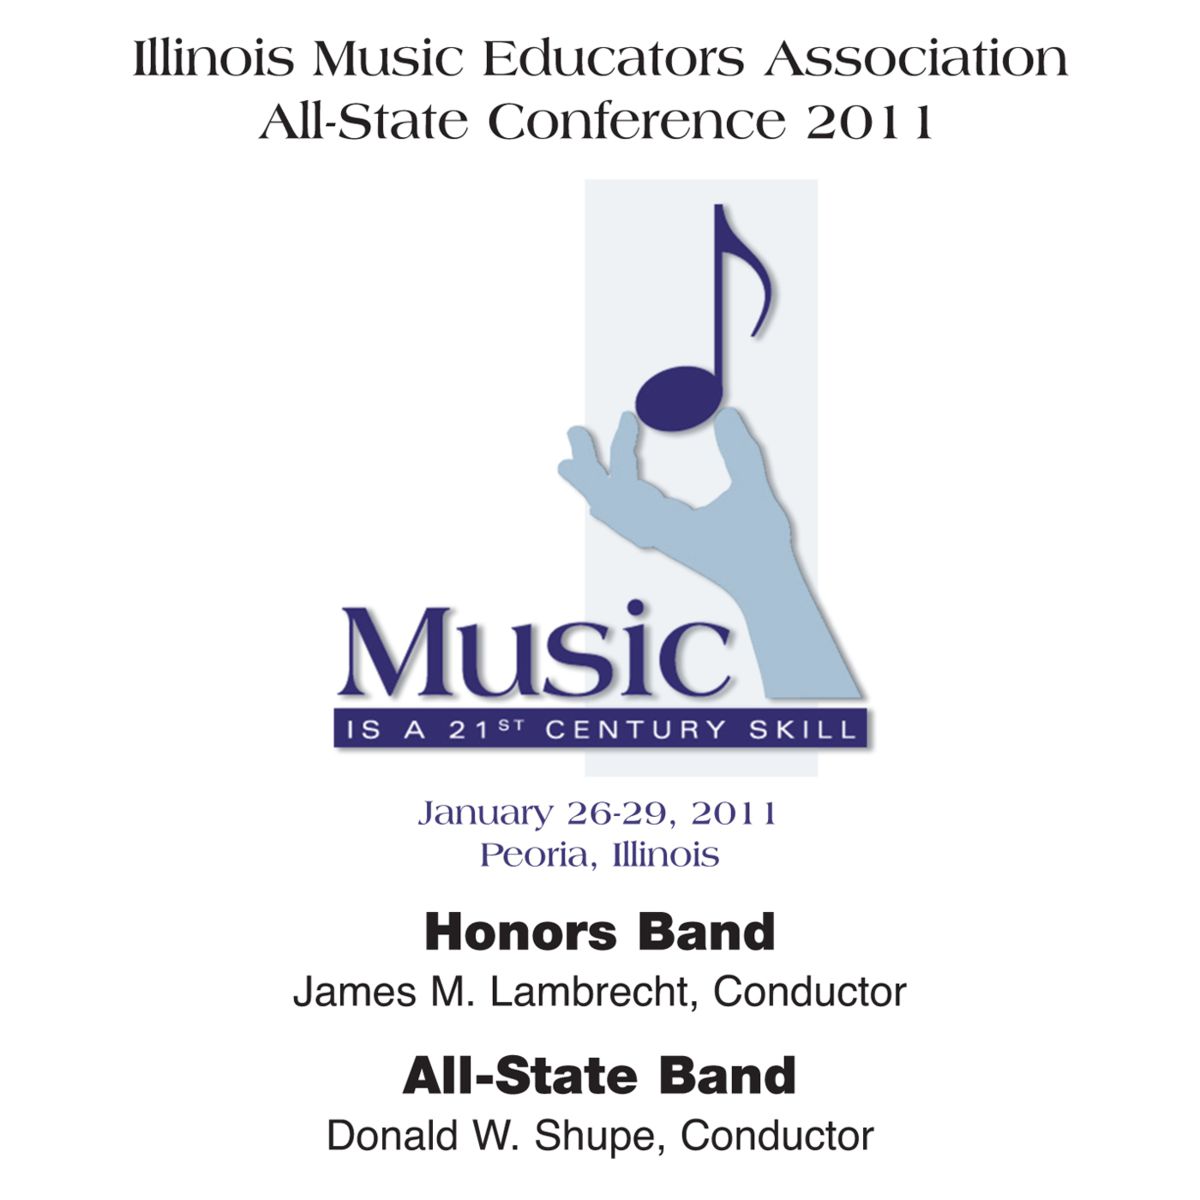 2011 Illinois Music Educators Association: Honors Band and All-State Band - click here